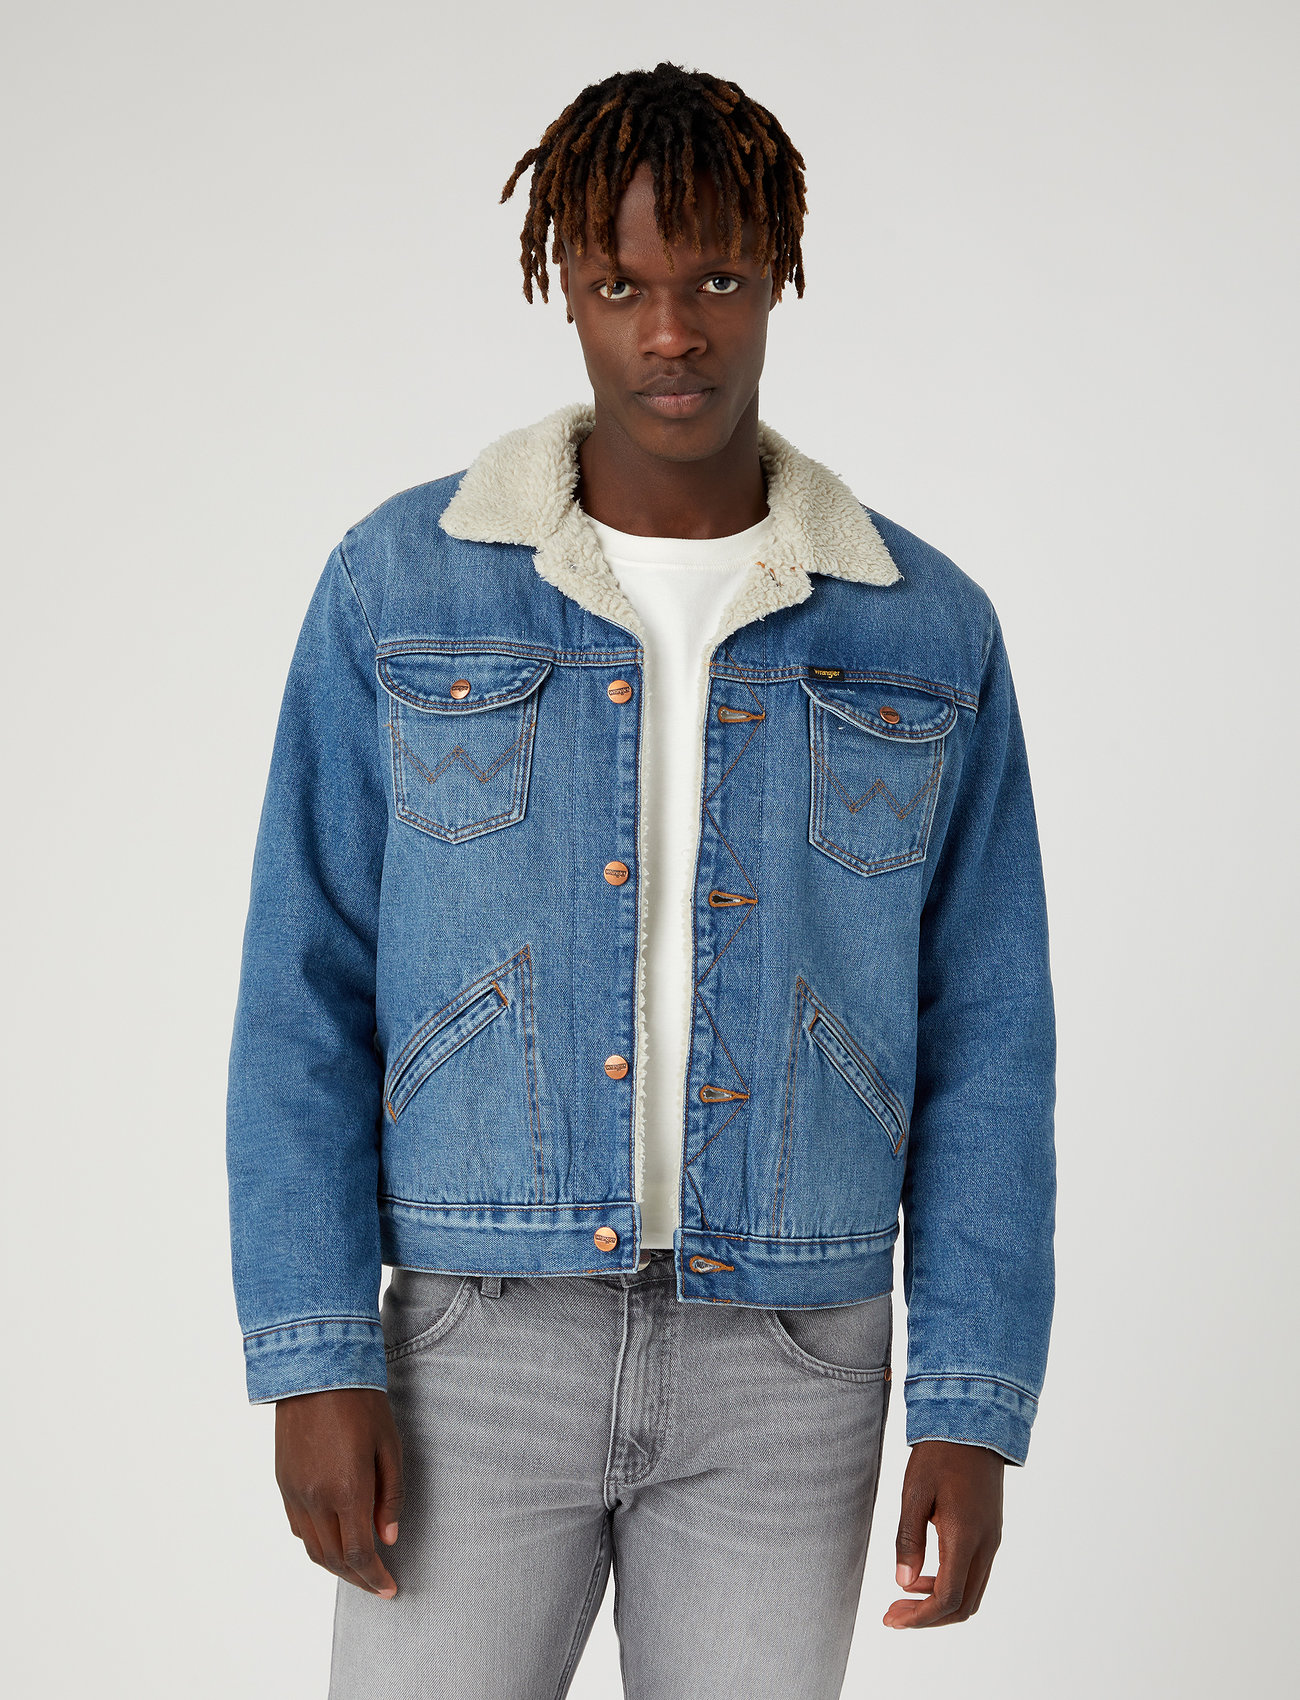 Wrangler 124wj Sherpa  €. Buy Denim Jackets from Wrangler online at  . Fast delivery and easy returns